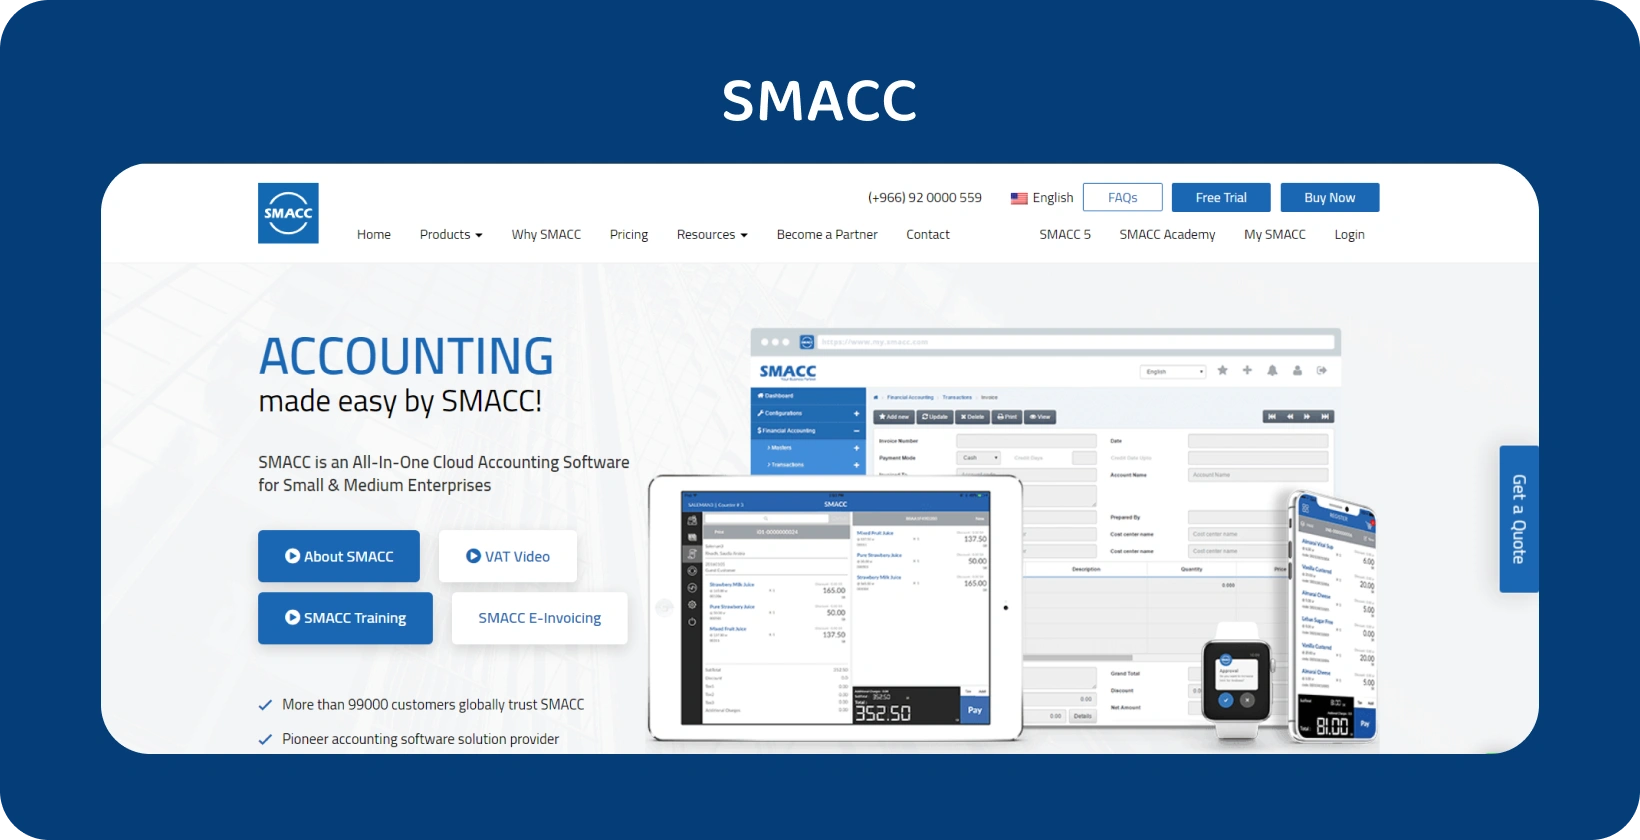 SMACC Cloud Accounting Software displayed on various devices, enhancing financial management for SMEs.